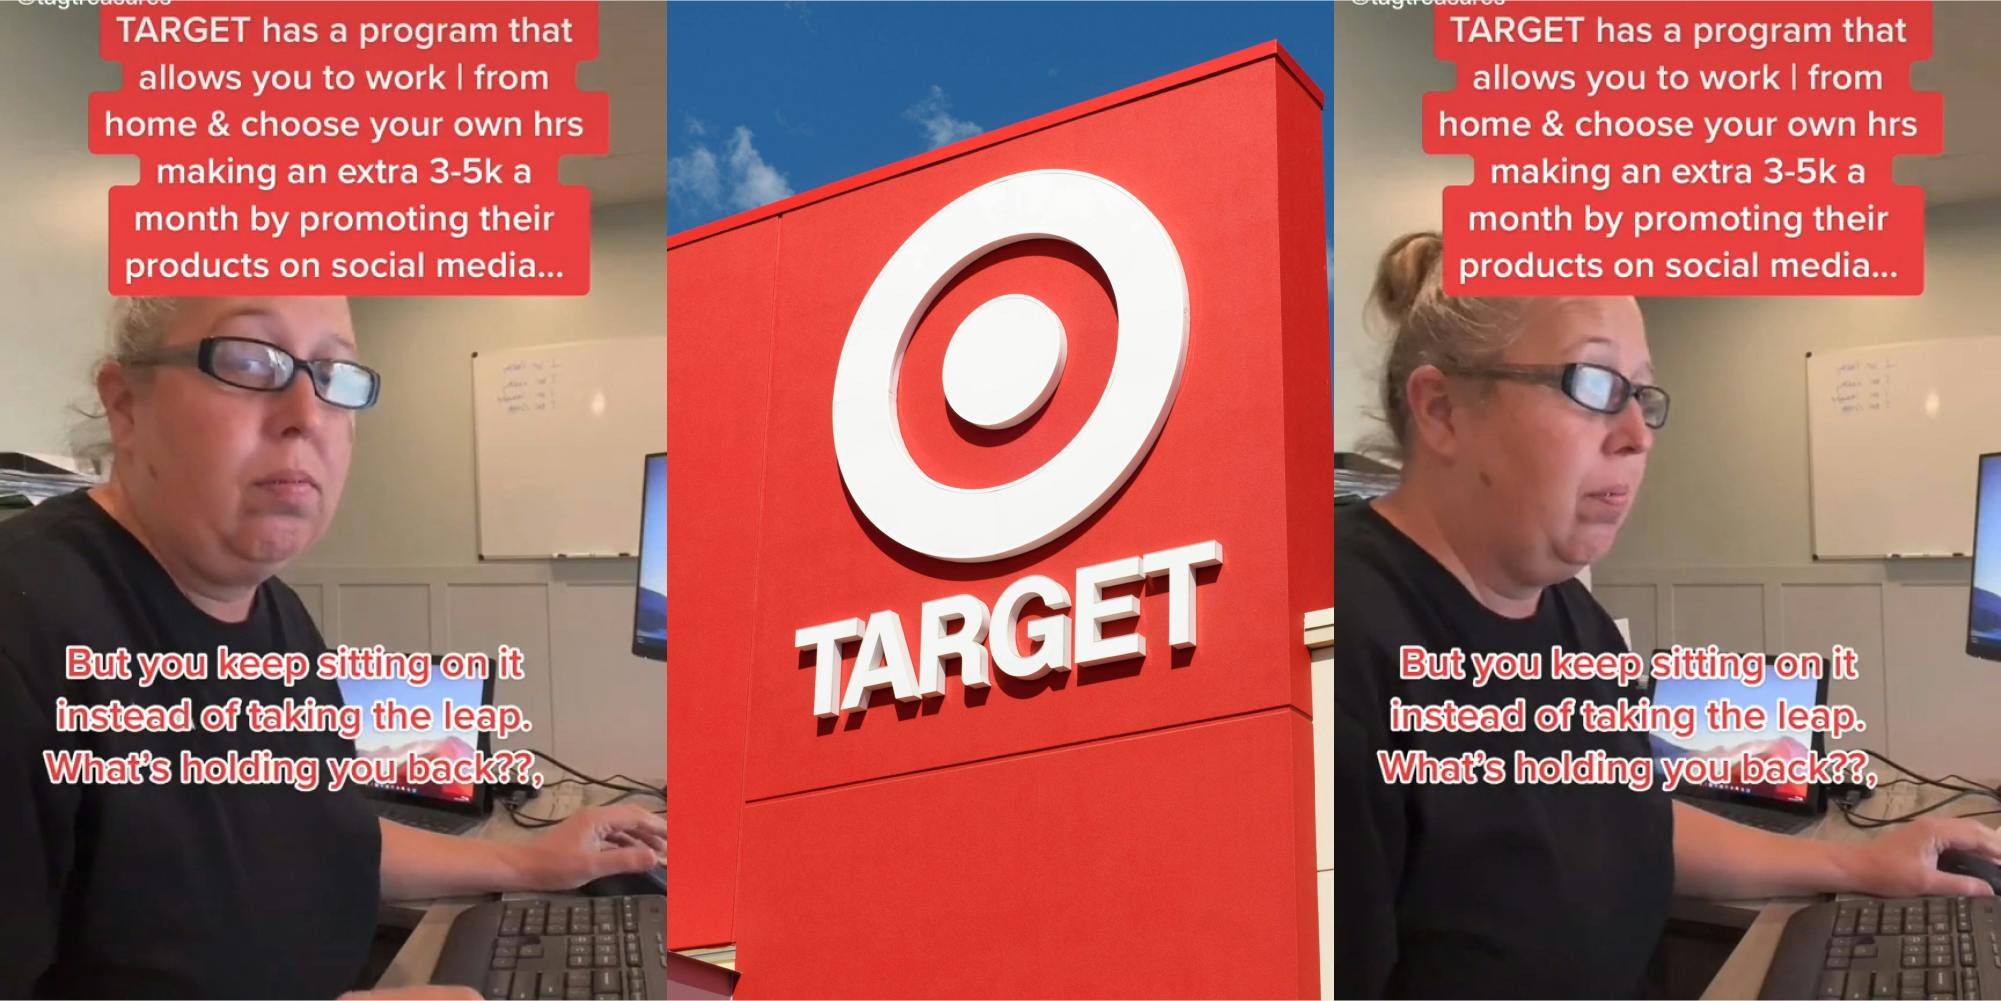 Woman Claims Target Has Work-from-home Program in PSA